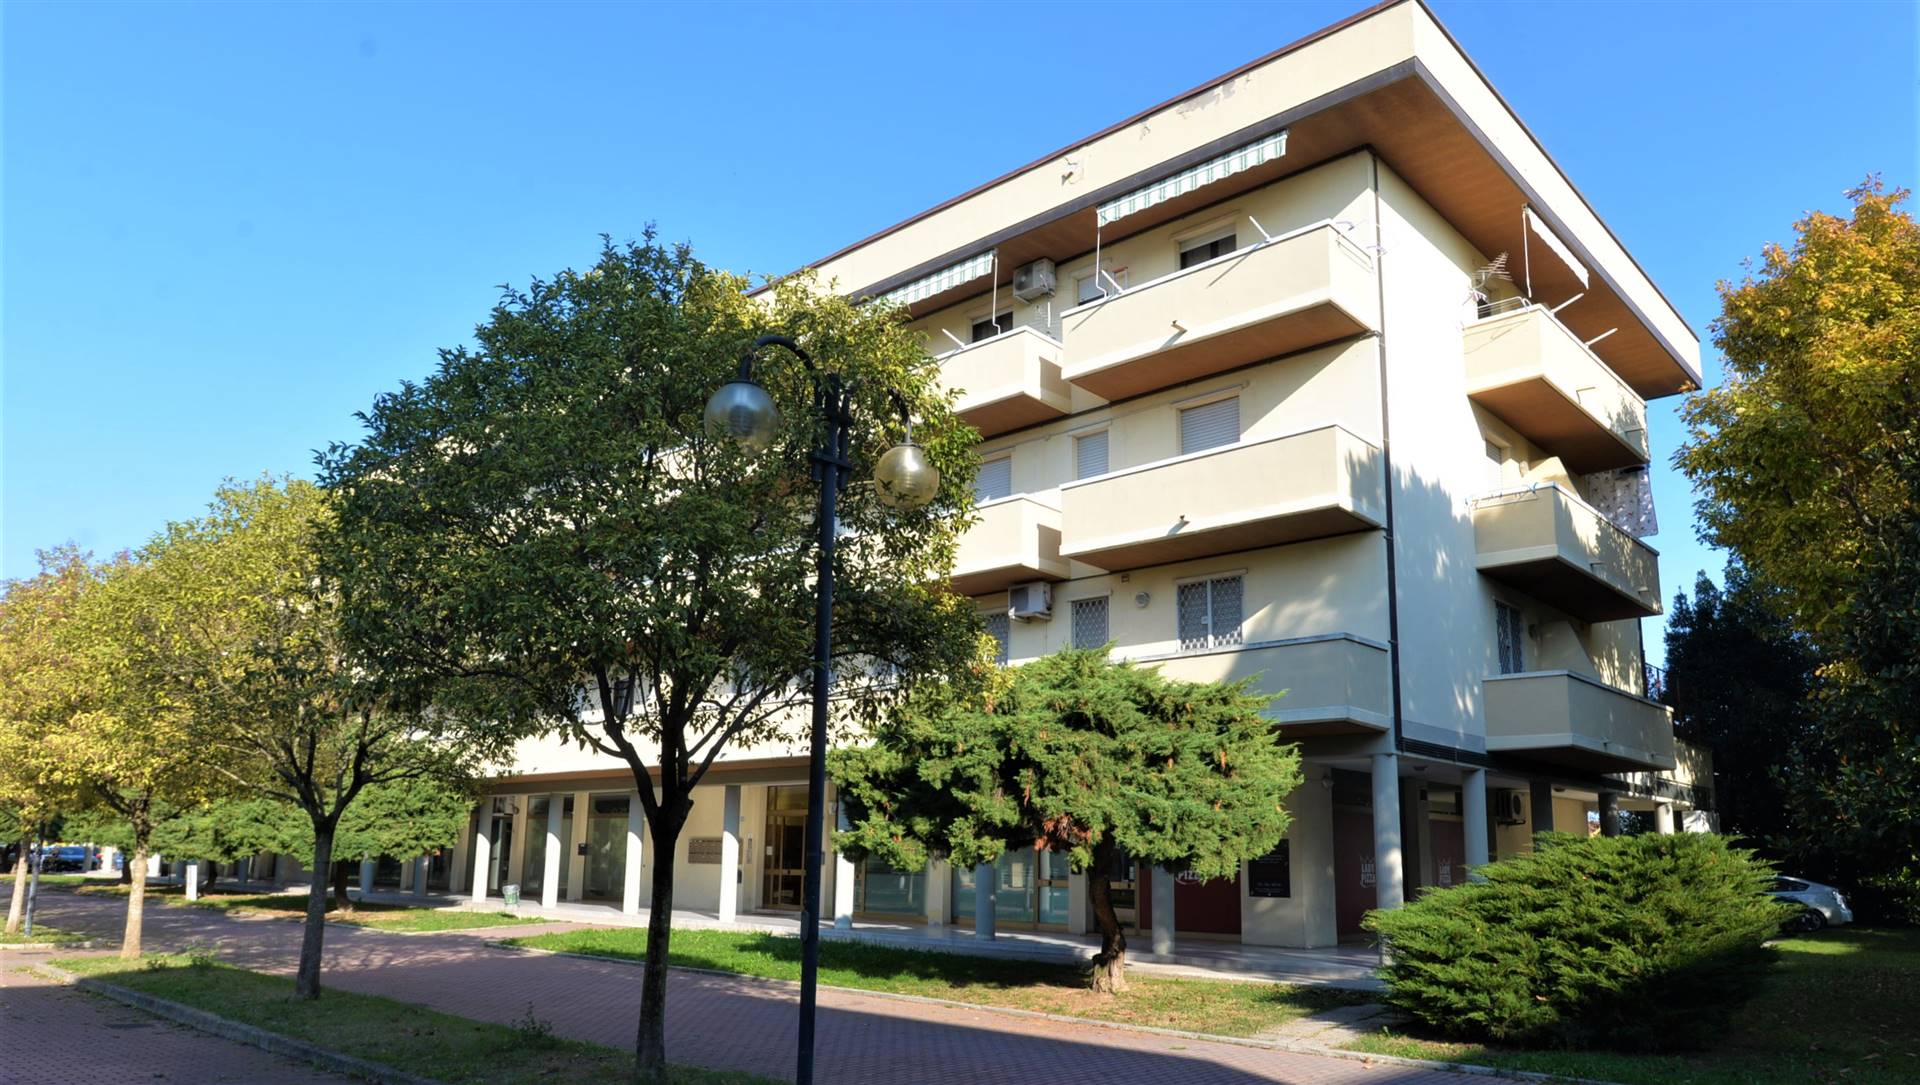 SANTA MARIA DI SALA, Apartment for sale, Habitable, Heating Individual heating system, Energetic class: G, Epi: 200 kwh/m2 year, placed at 3° on 3, composed by: 5 Rooms, Separate kitchen, , 3 